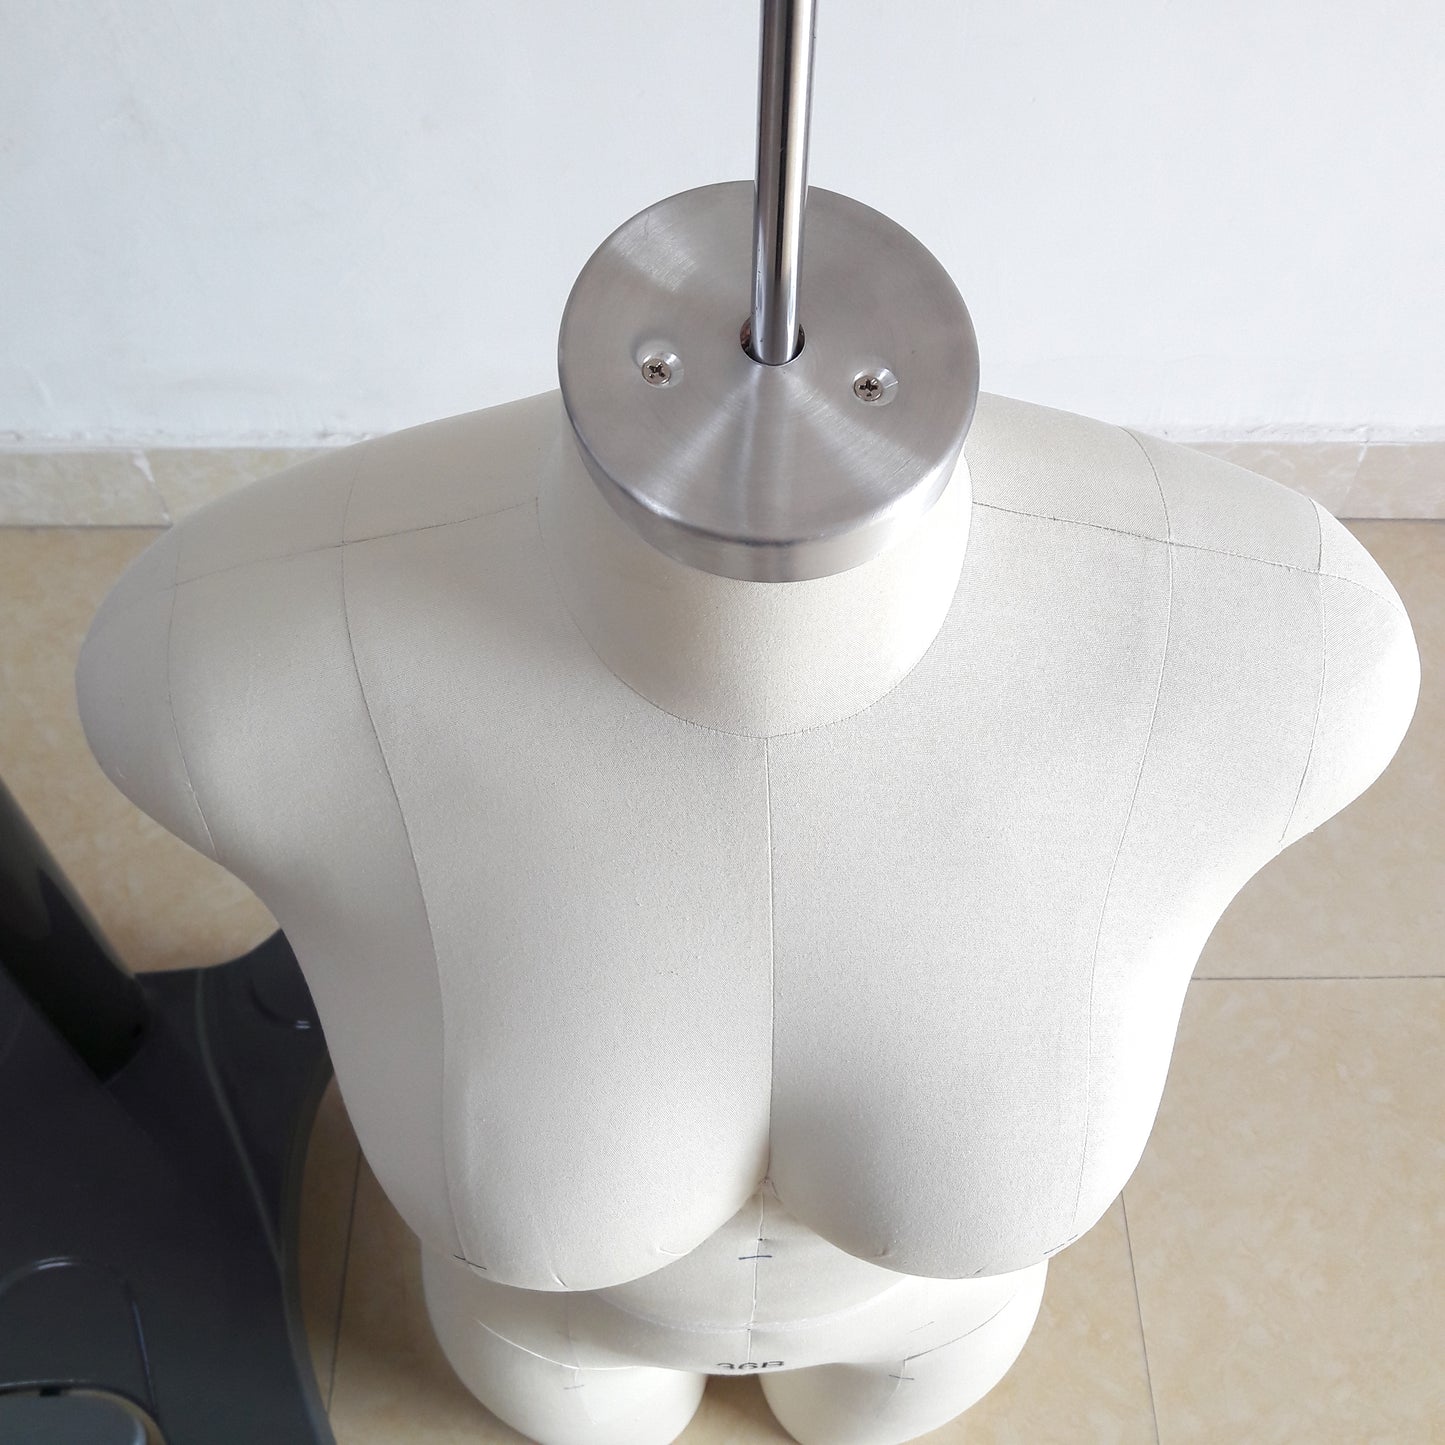 DL900 36B Female Mannequin, Lingerie Swimming Tailor Model for sewing, Half Body Adult  Full High Quality Dressmaker Dummy By sea